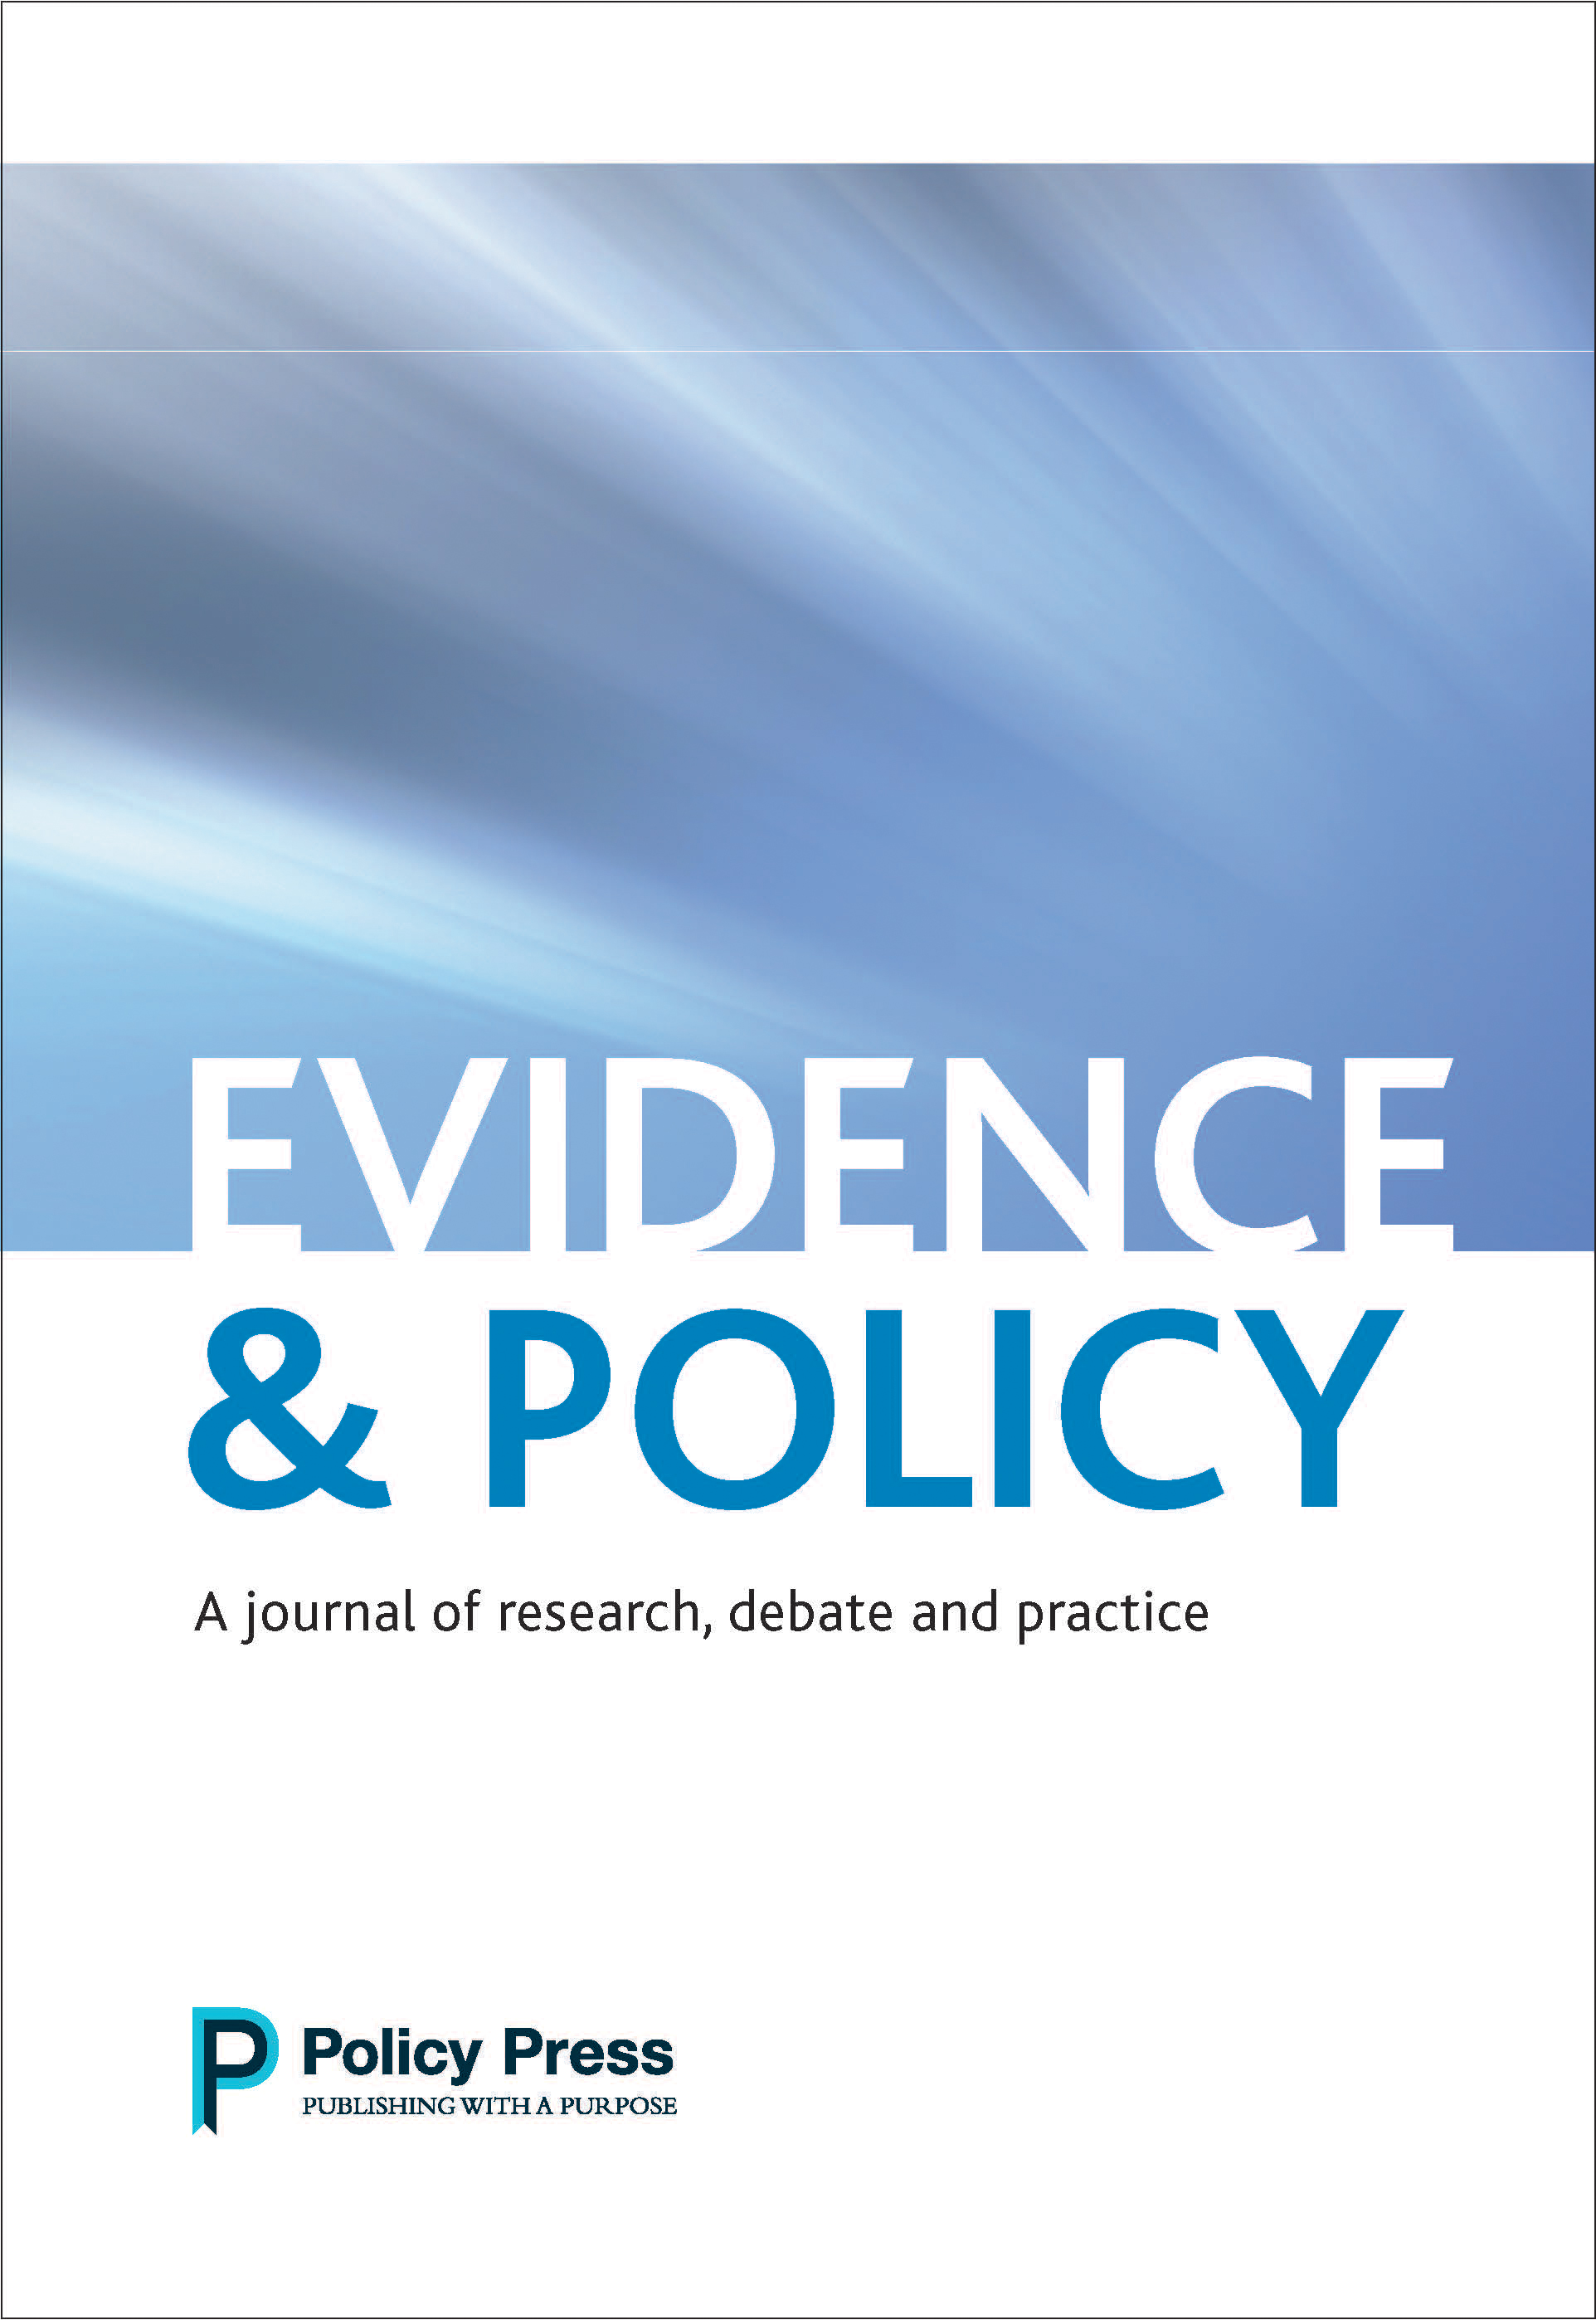 Introducing the new Editors of Evidence & Policy